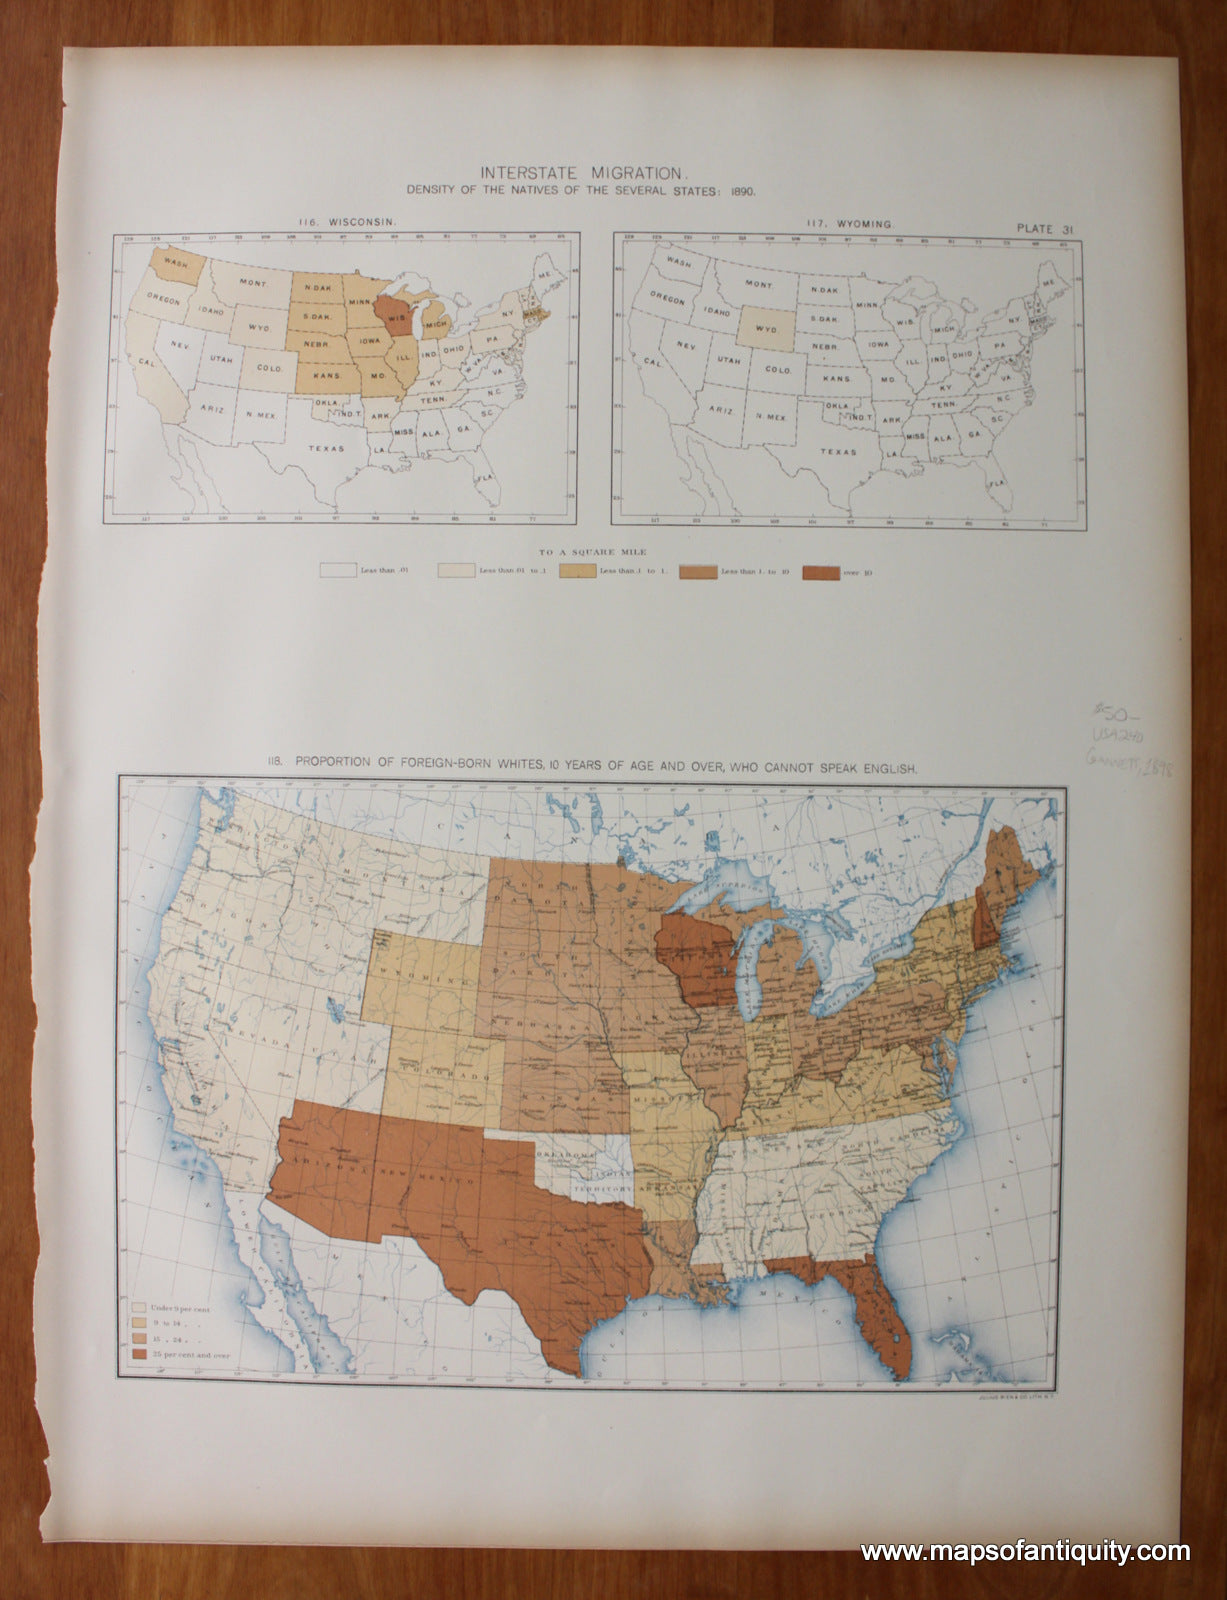 Antique-Printed-Color-Map-Proportion-of-Foreign-Born-Whites-10-Years-of-Age-and-Over-Who-Cannot-Speak-English-United-States-United-States-General-1898-Gannett-Maps-Of-Antiquity